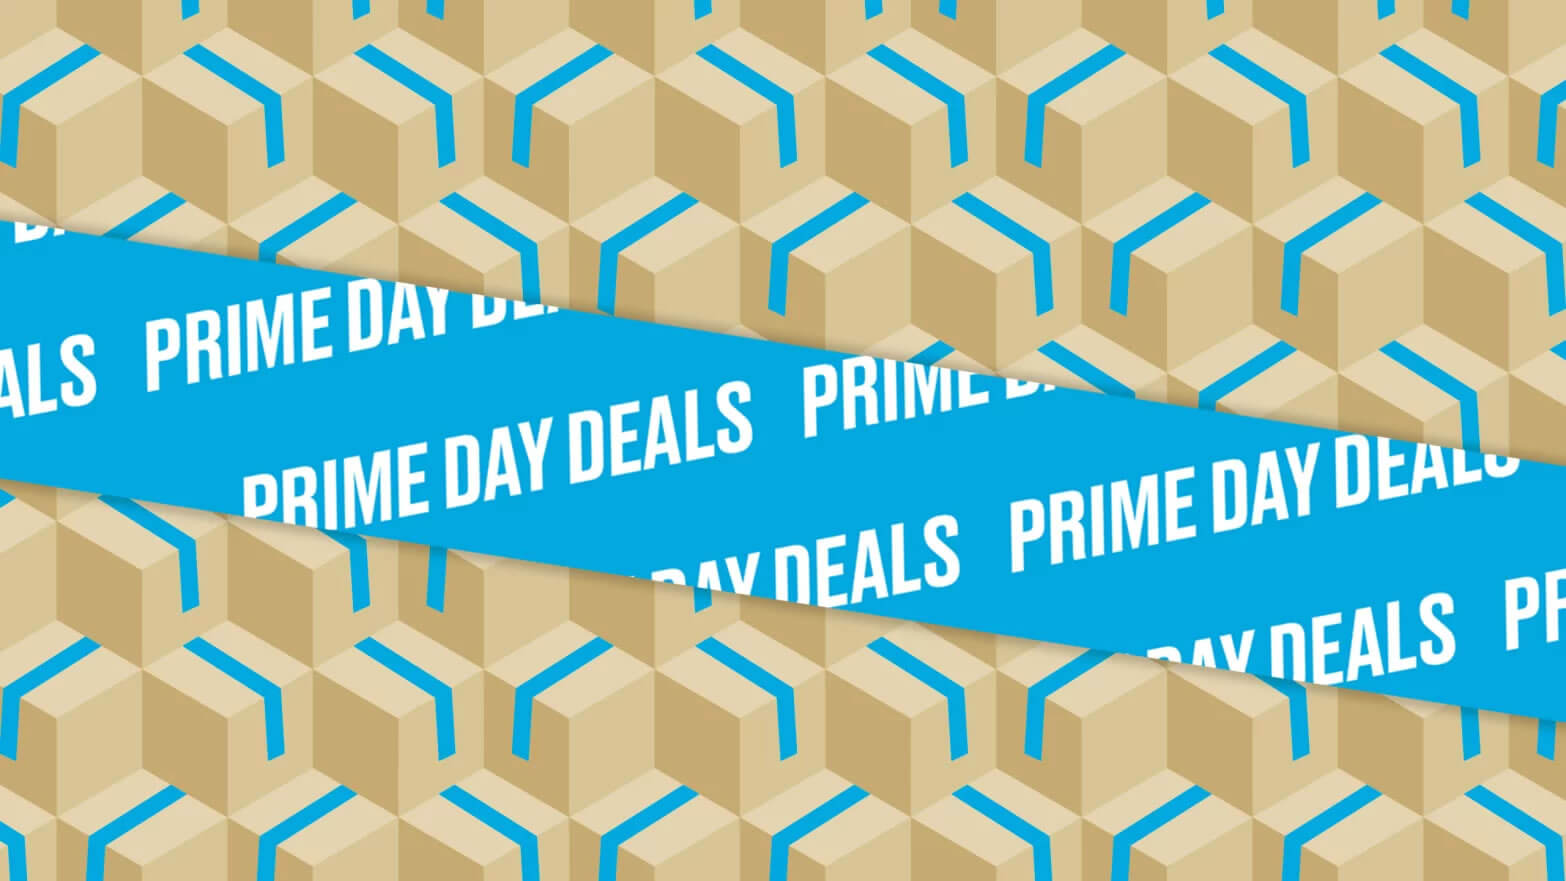 Here are 28 Prime Day deals on PC hardware and electronics that are still live